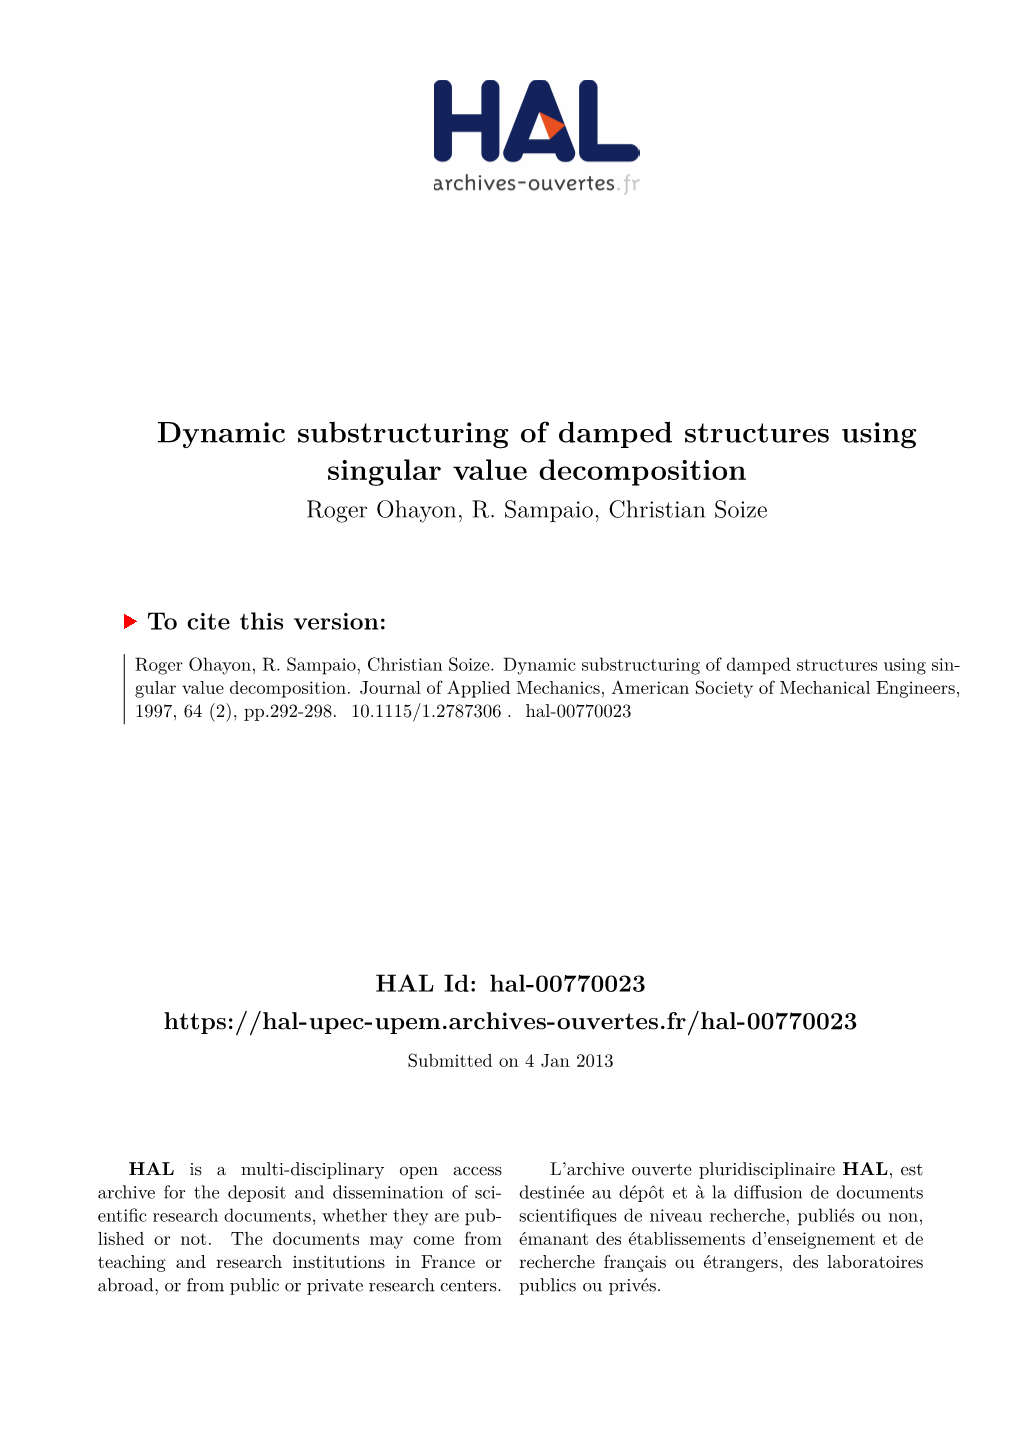 Dynamic Substructuring of Damped Structures Using Singular Value Decomposition Roger Ohayon, R